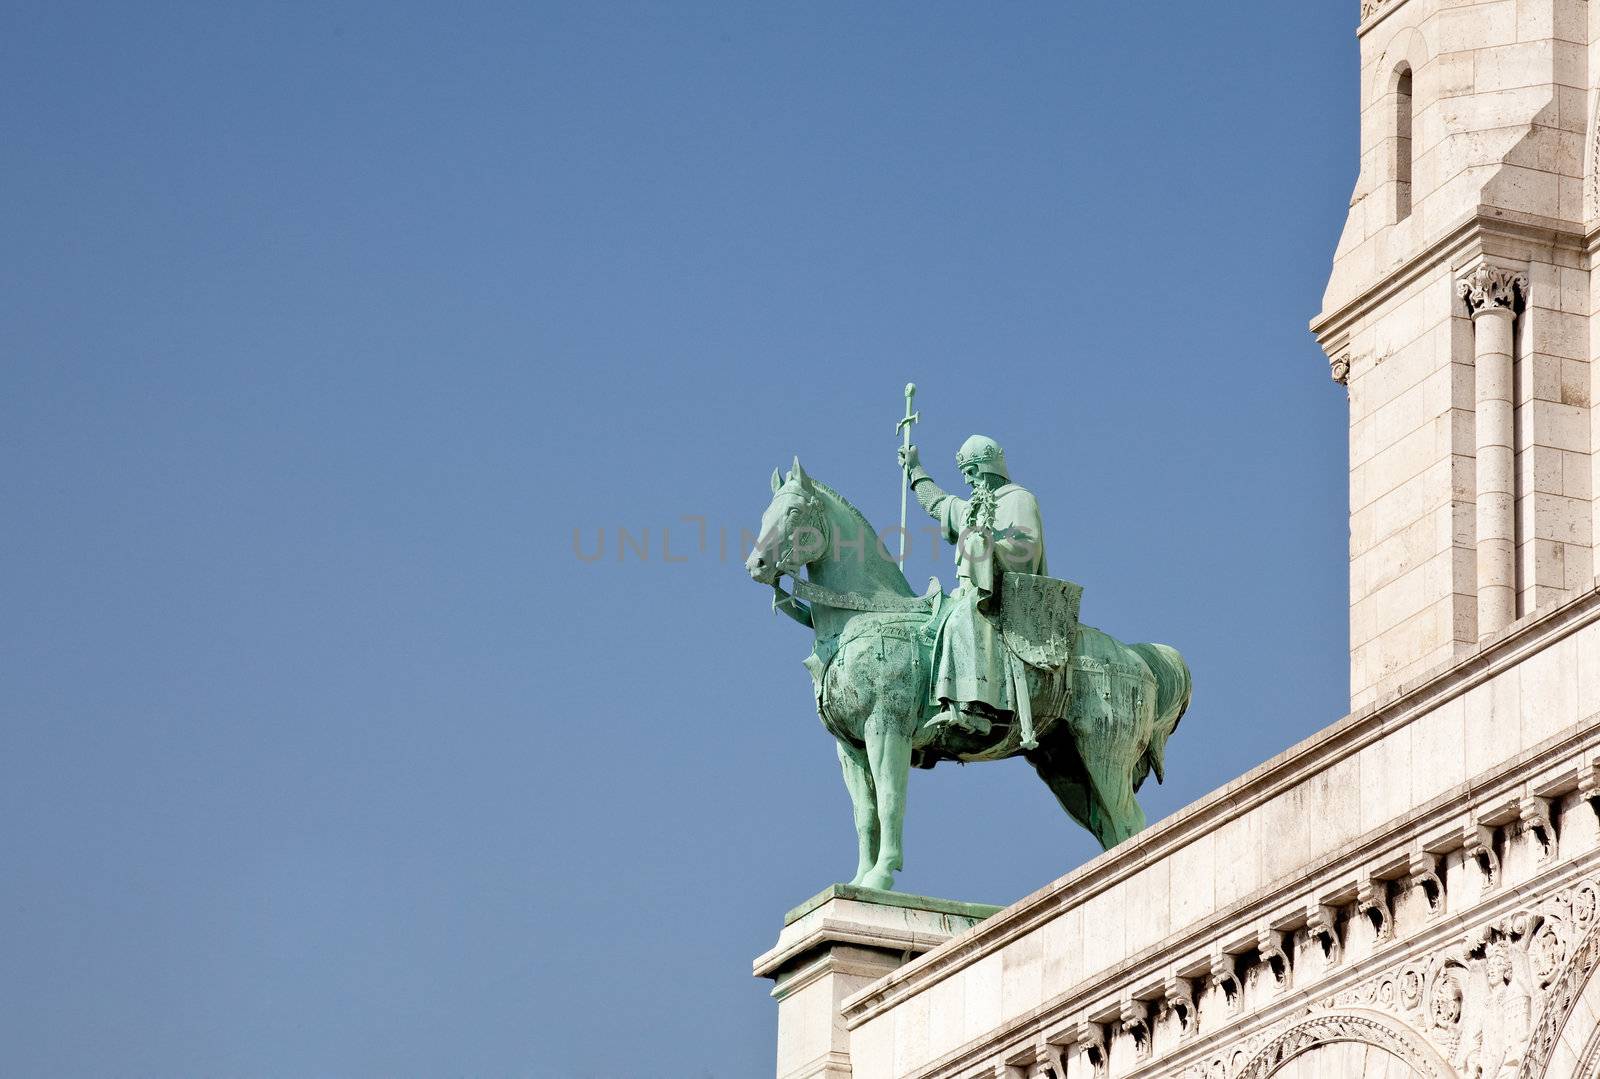 One of the green bronze statues on the edge of Sacre Coeur in Paris